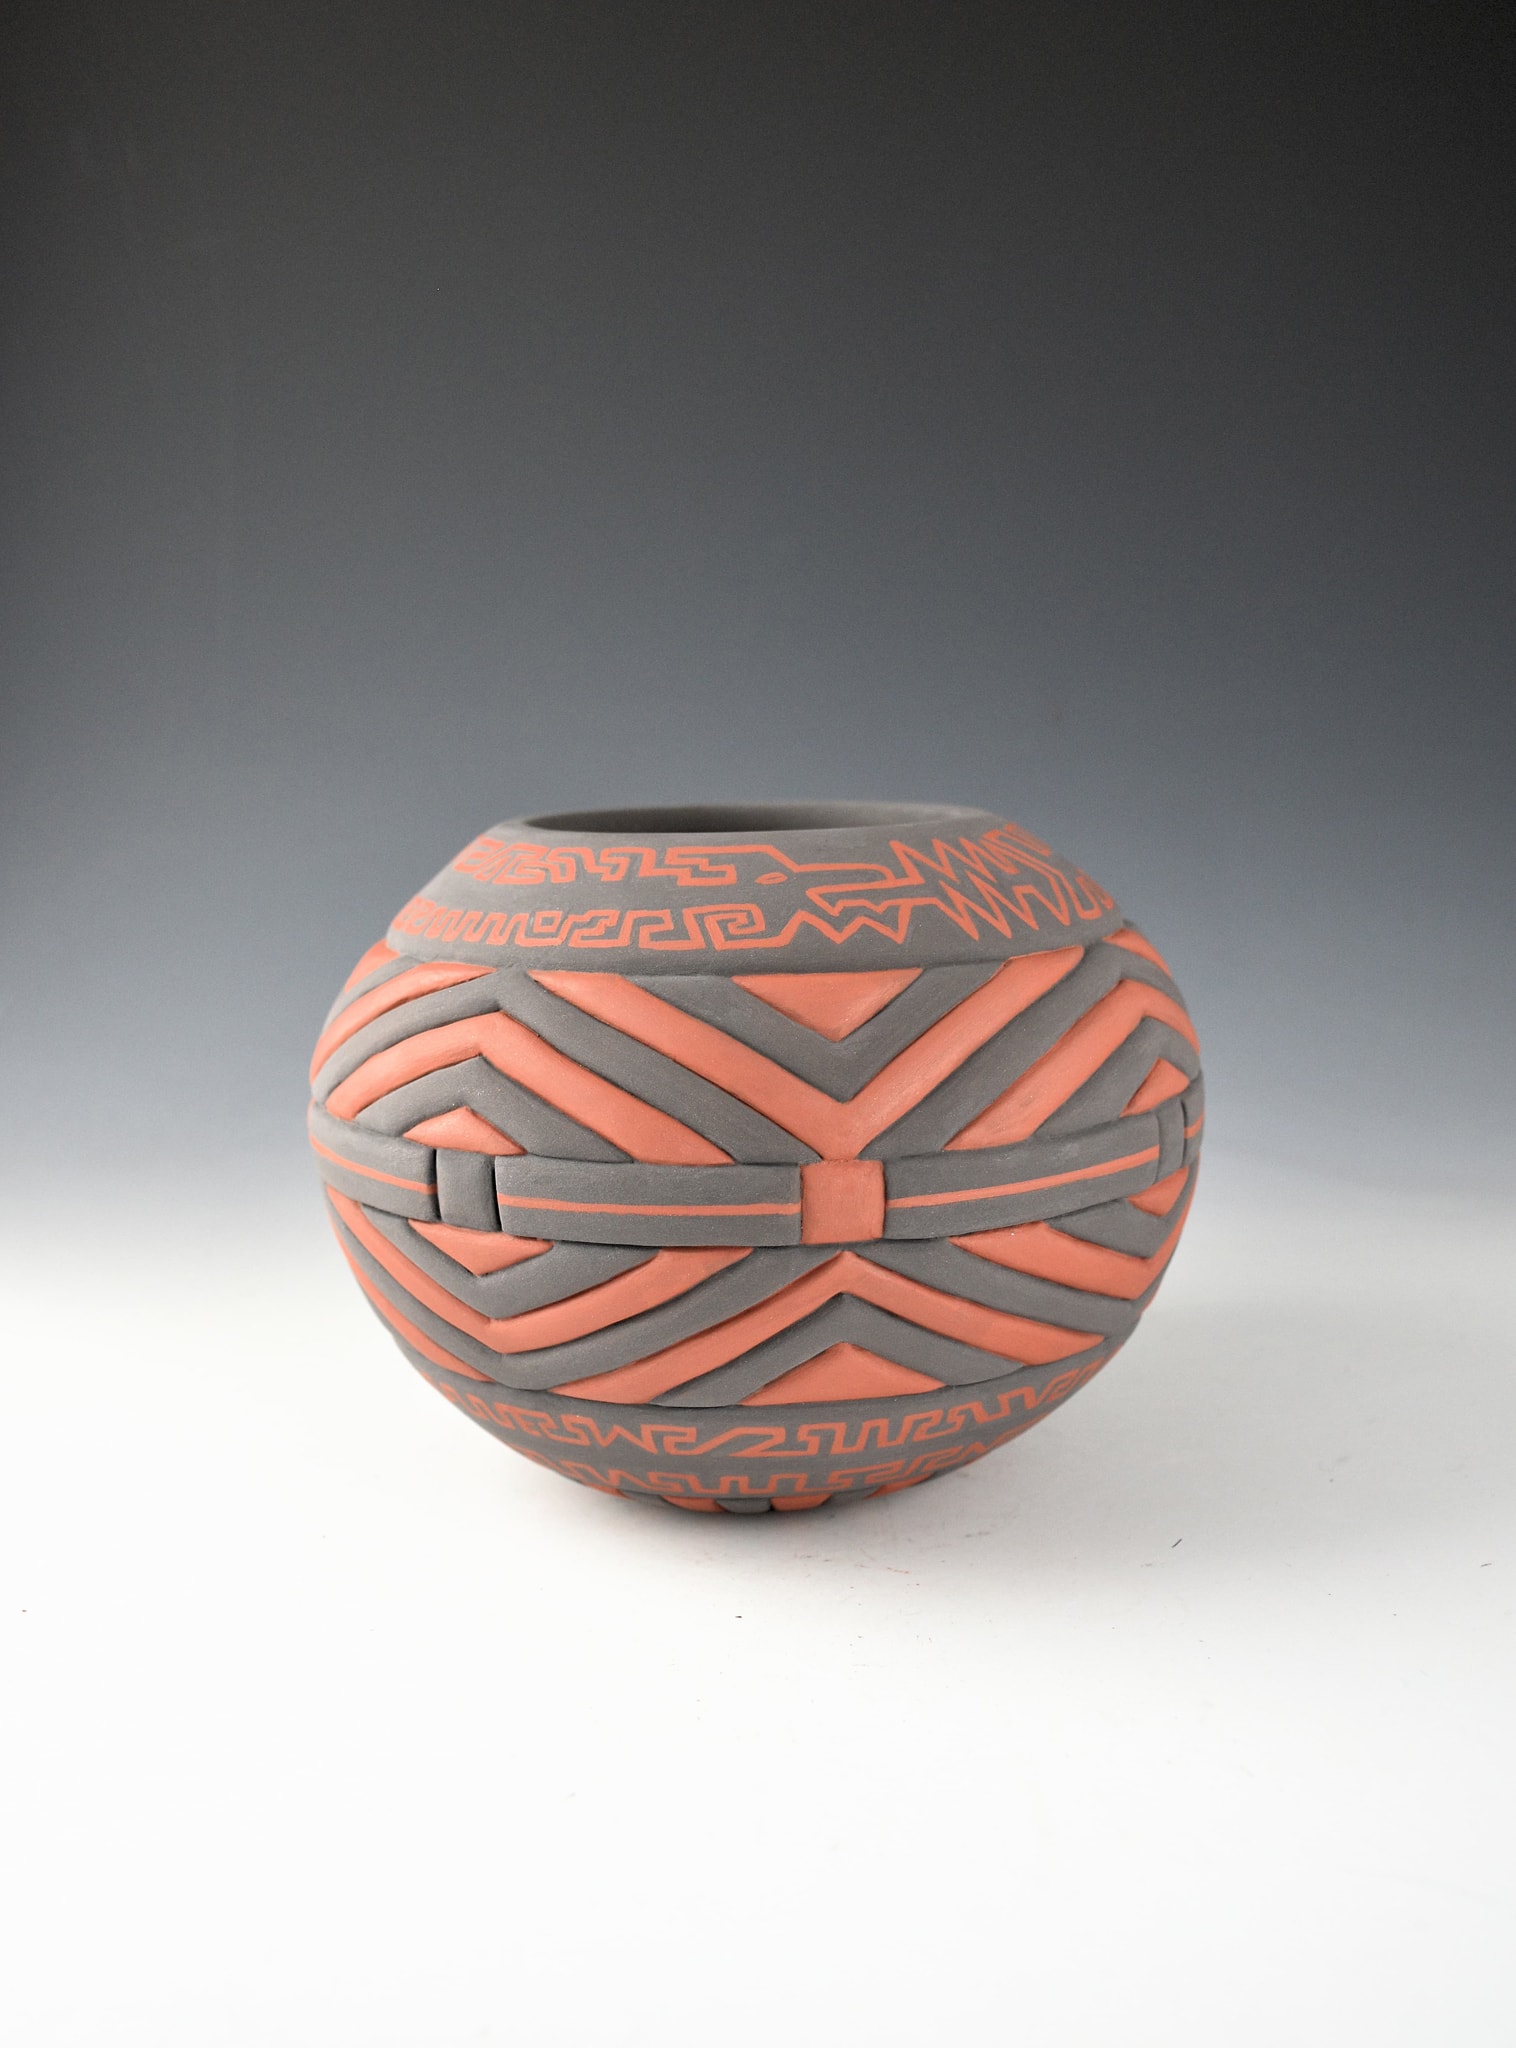 Sergio Youngblood Lugo, Carved Bowl, Craft in America